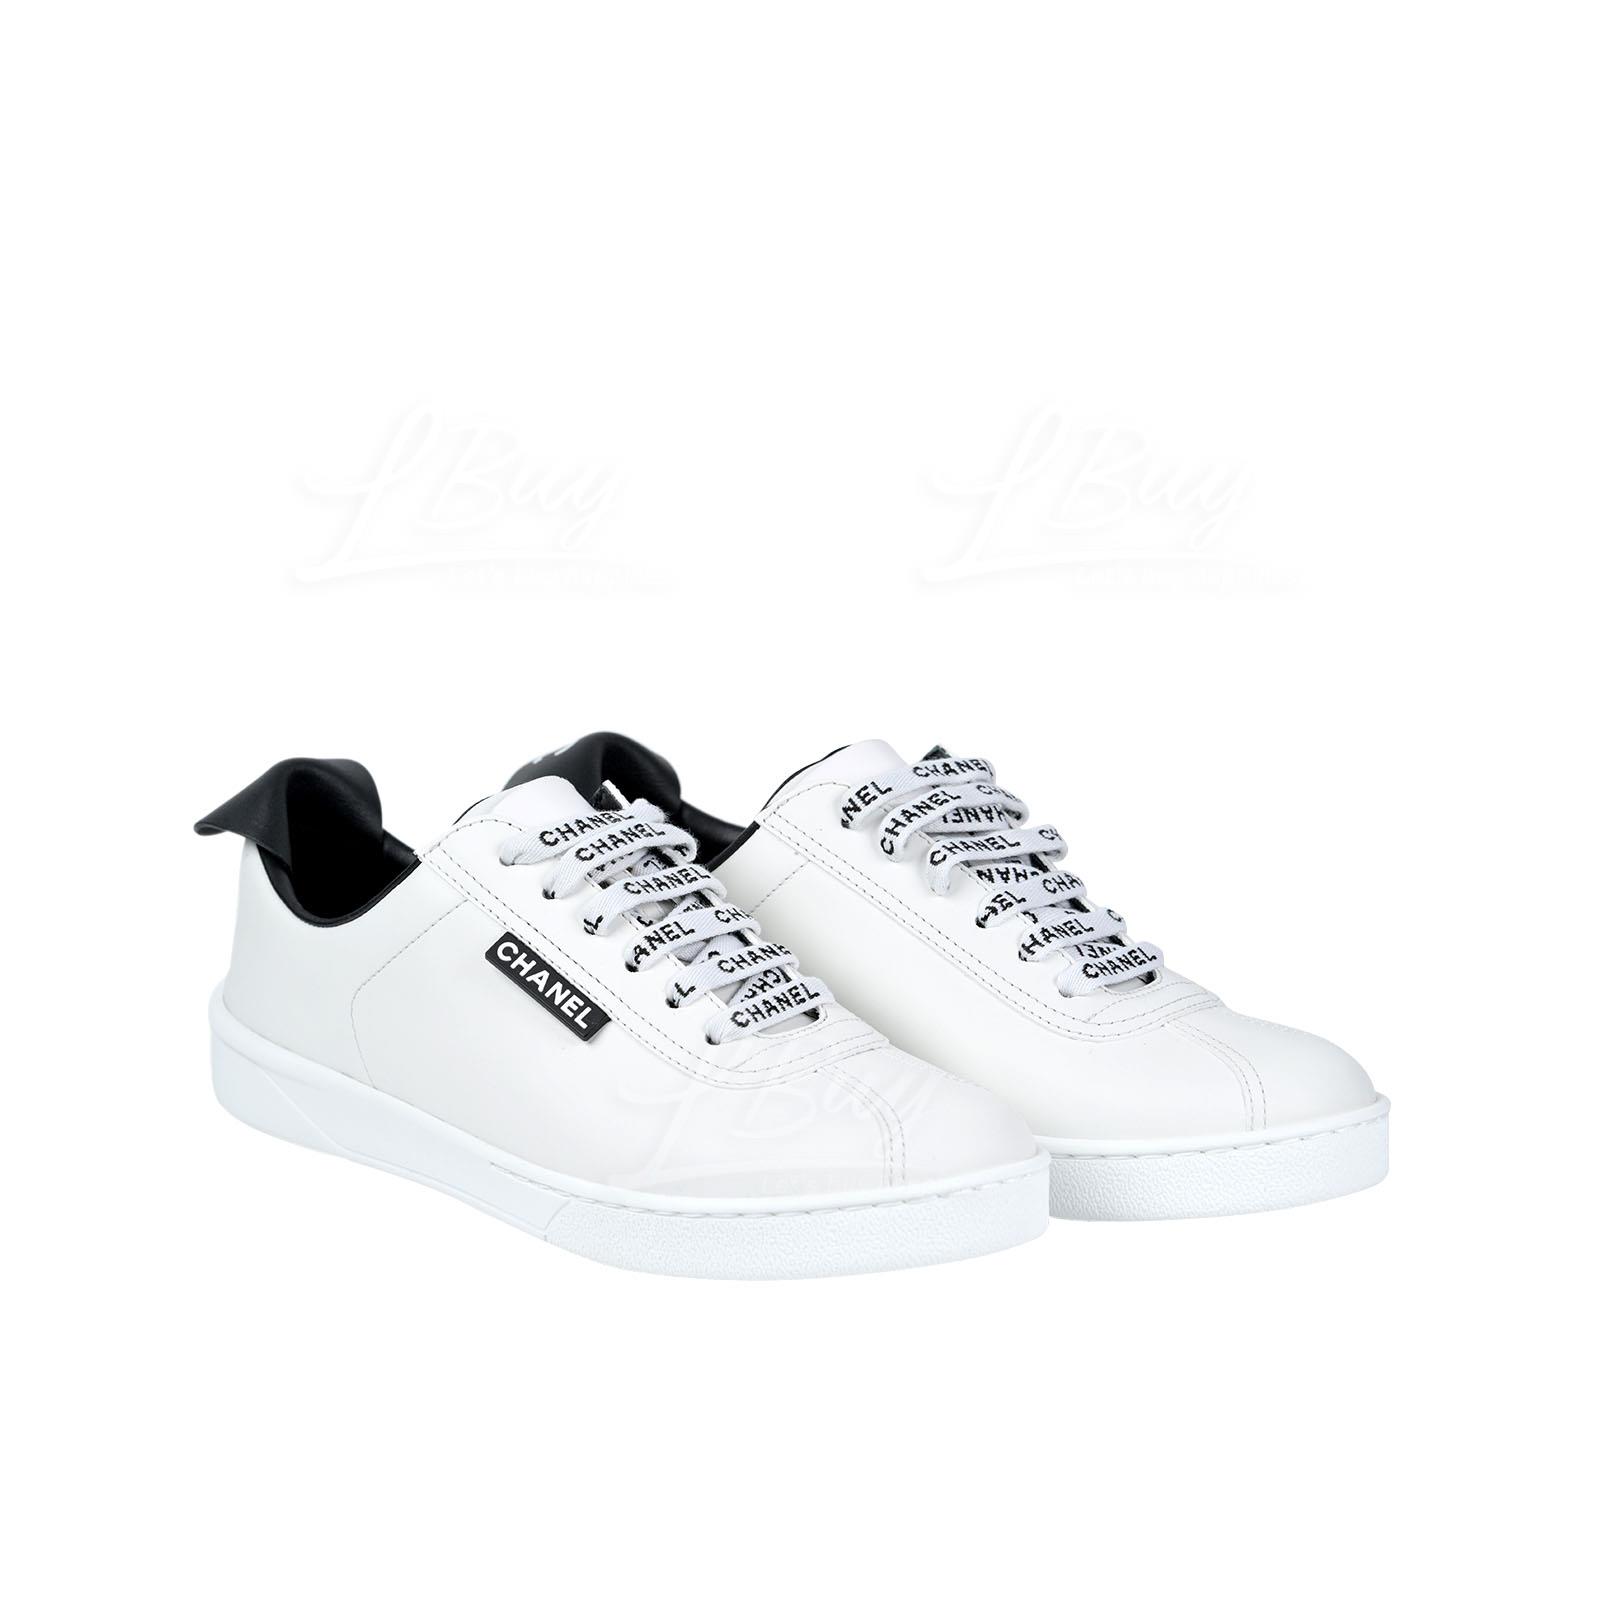 Chanel MultiMaterials Blue CHANEL Logo Lace Up Sneakers 37  STYLISHTOP